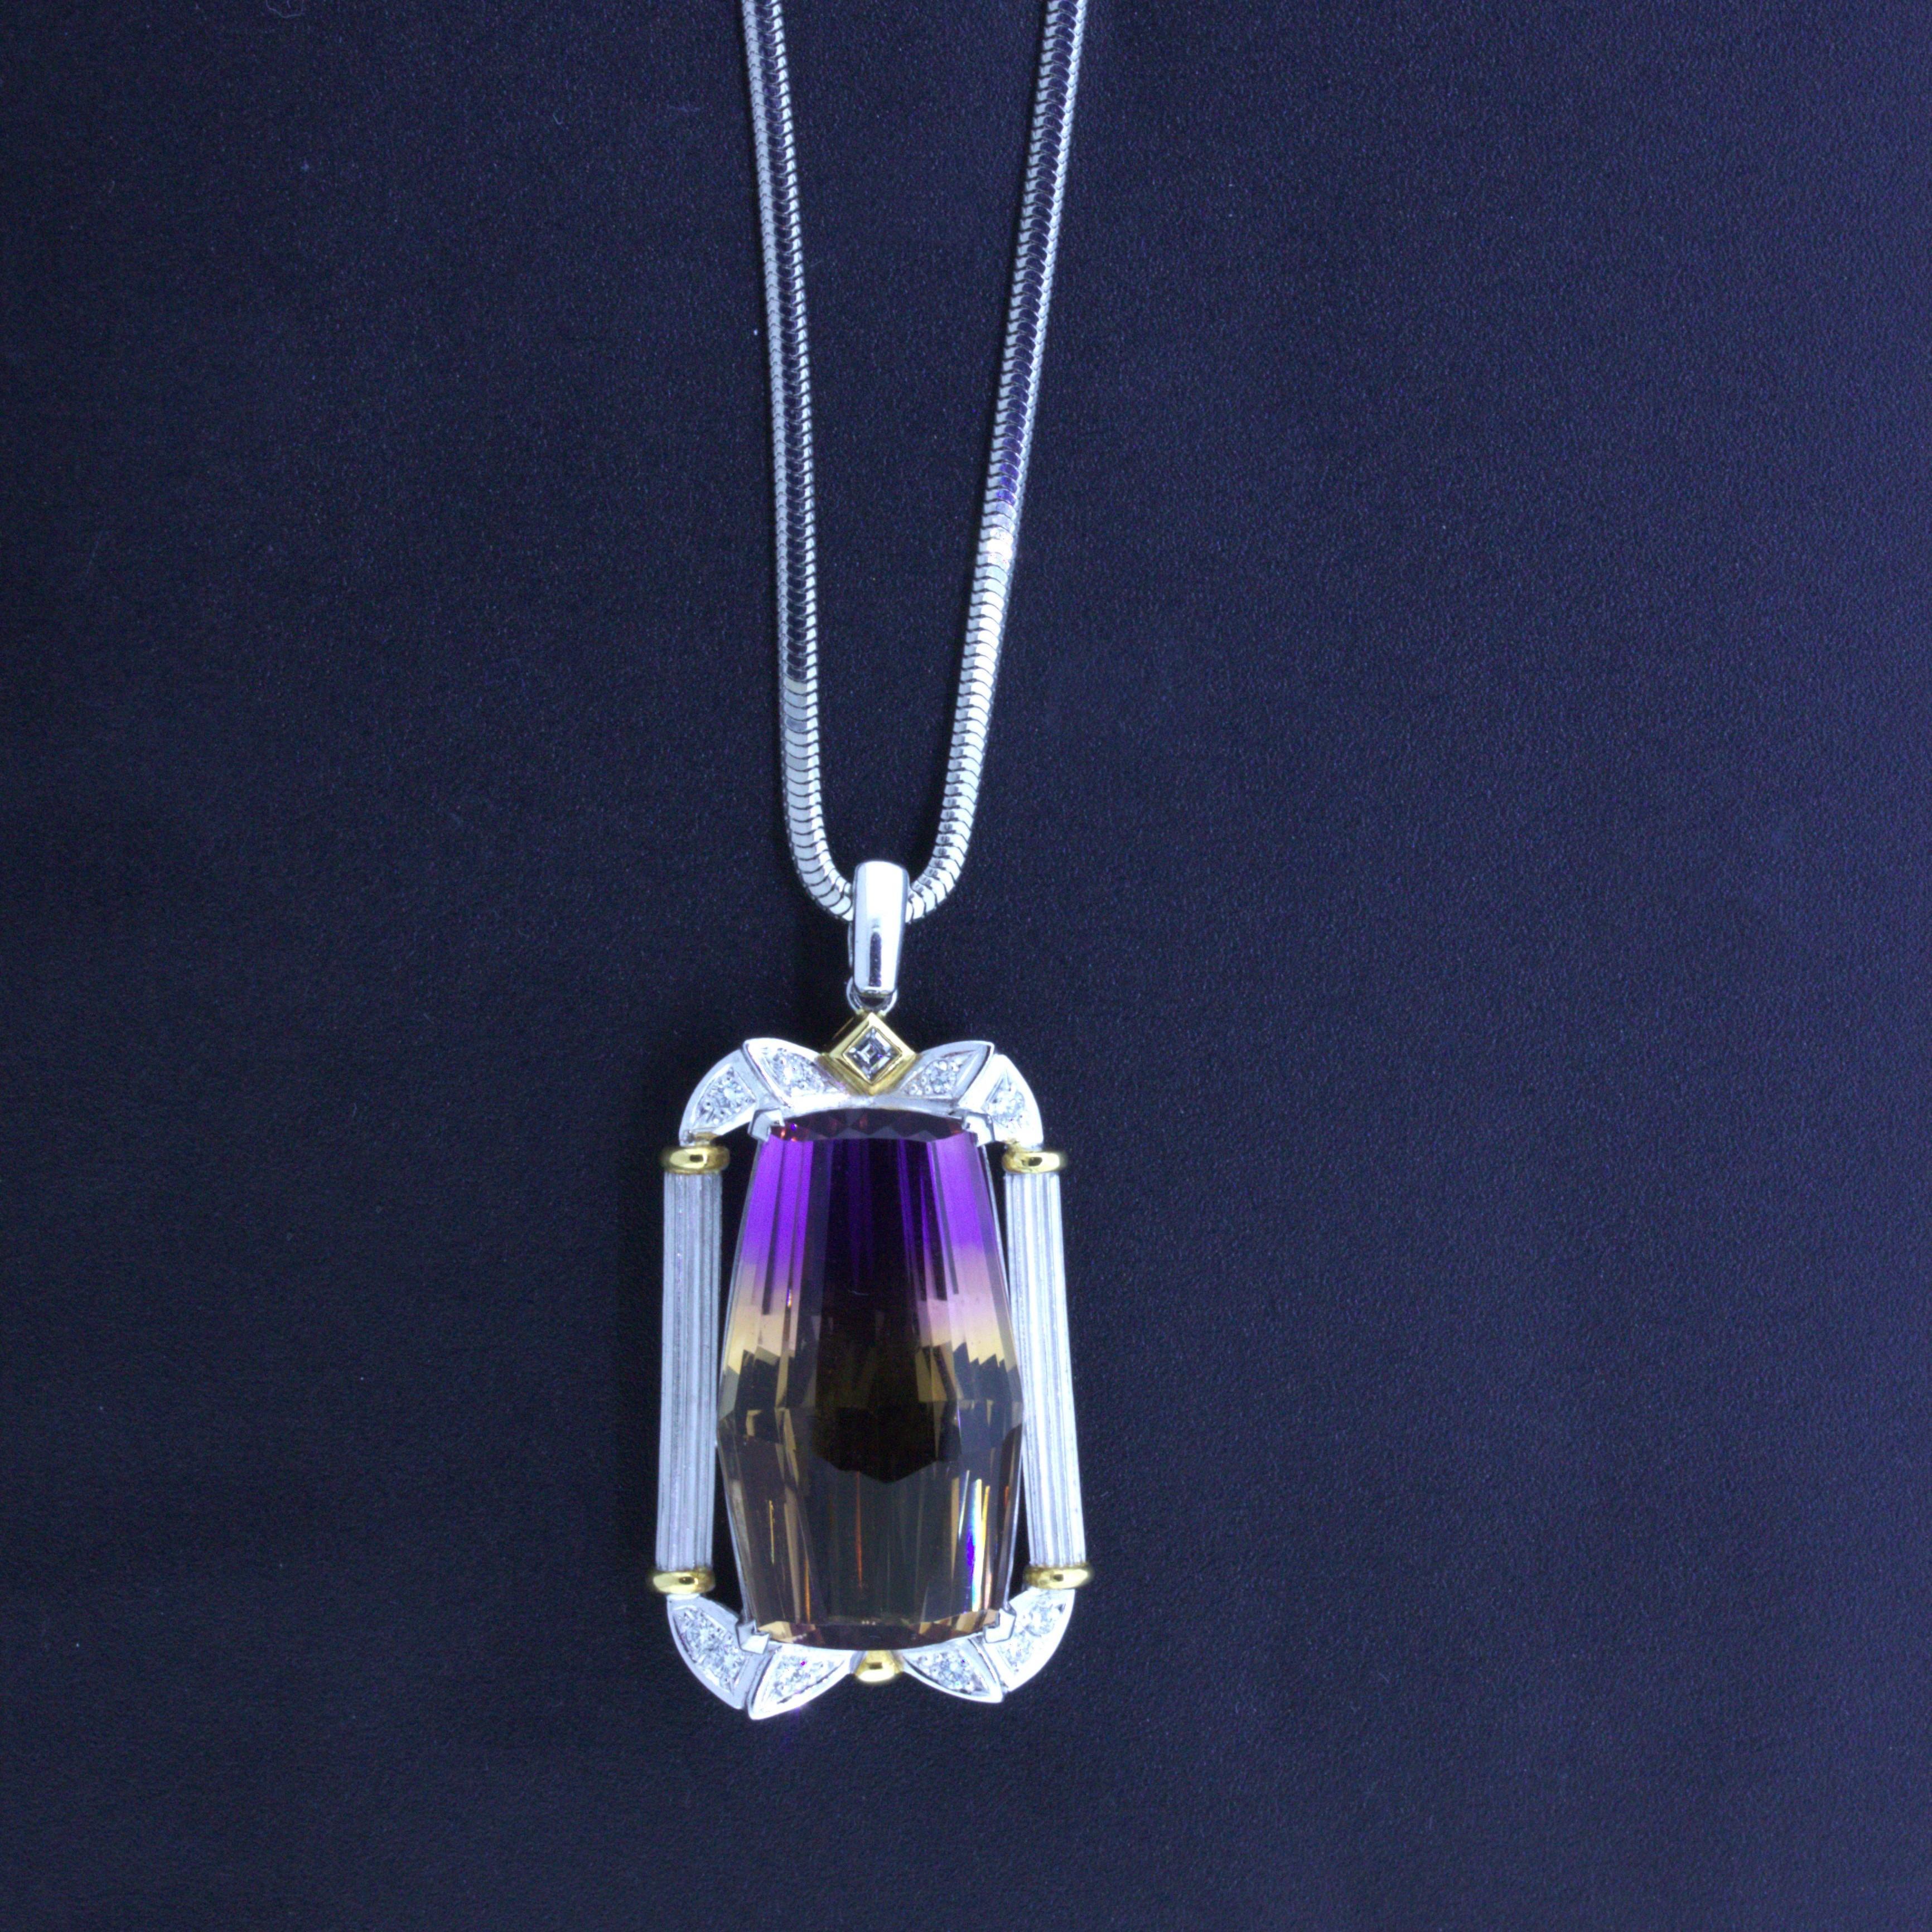 A beautiful 30.53 carat lozenge-shape ametrine takes center stage! It has a lovely orange and purple color with a sharp clean transition between the two colors. It is complemented by 0.27 carats of diamonds set around the frame of the pendant which